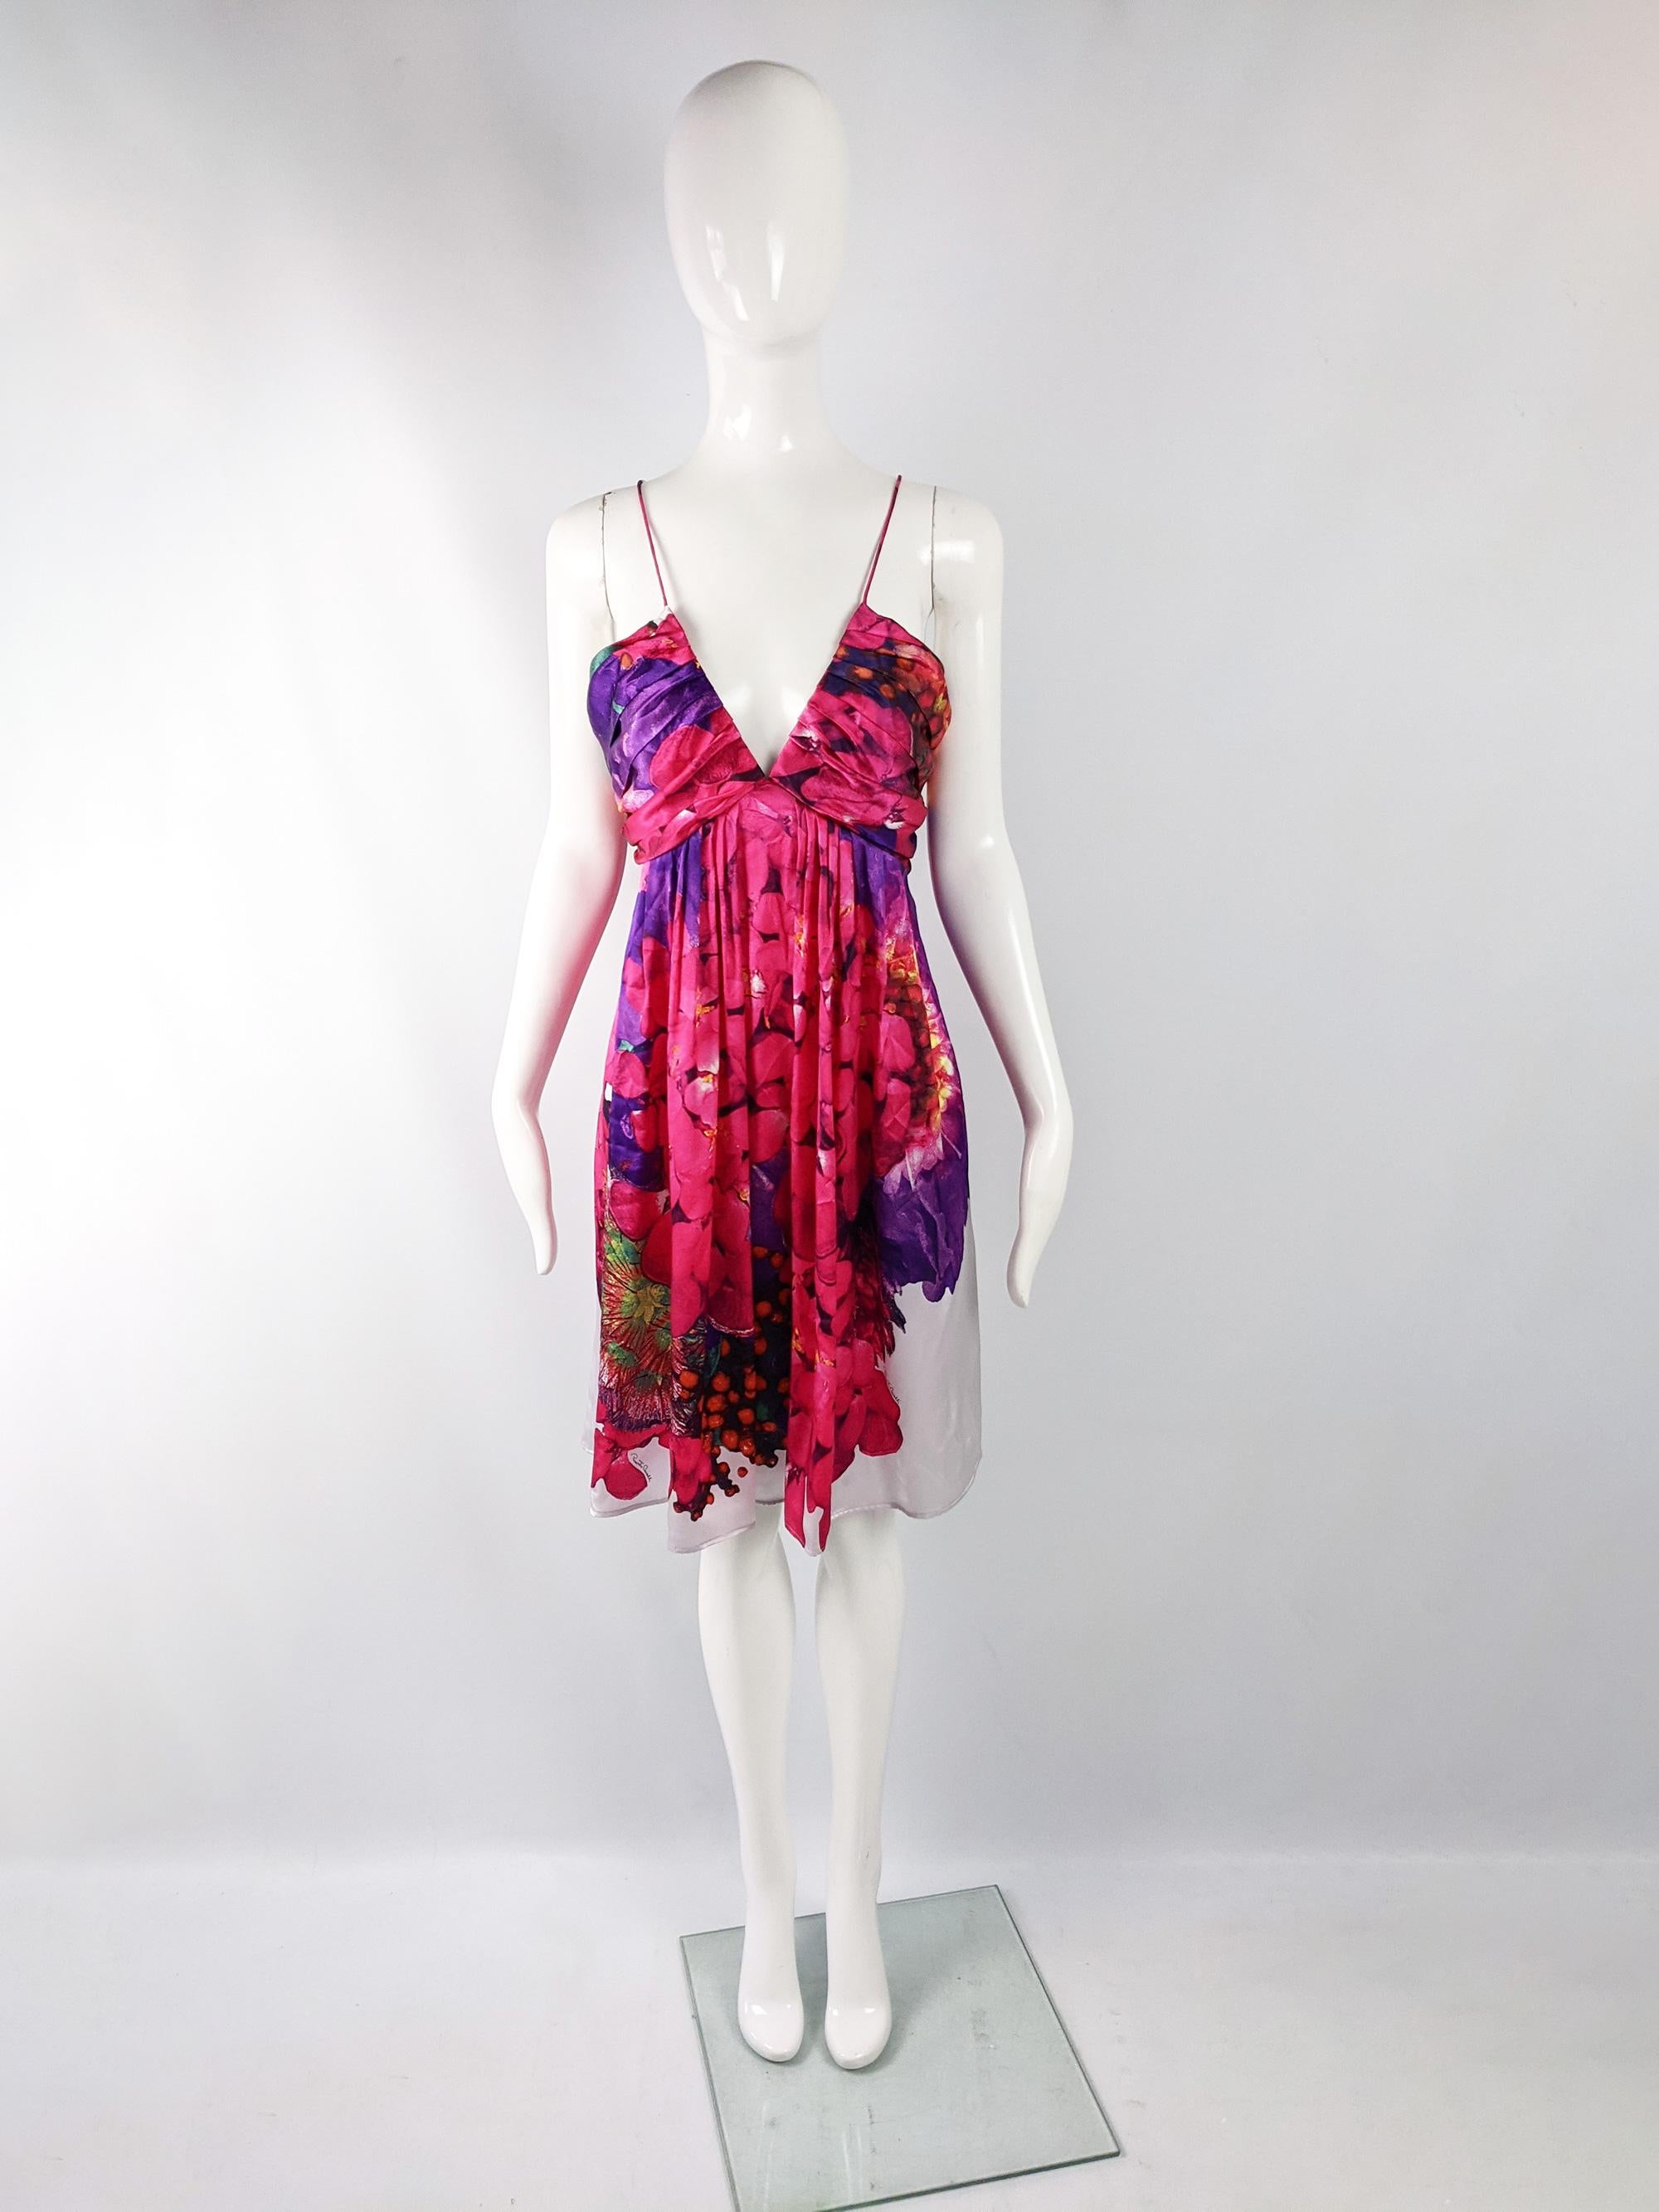 A stunning Roberto Cavalli sleeveless dress in a white and fuchsia vibrantly floral printed silk. The silhouette is so flattering with a draped, soft pleated bust with a plunging neckline, contrasting with the nipped waist and flared skirt for an